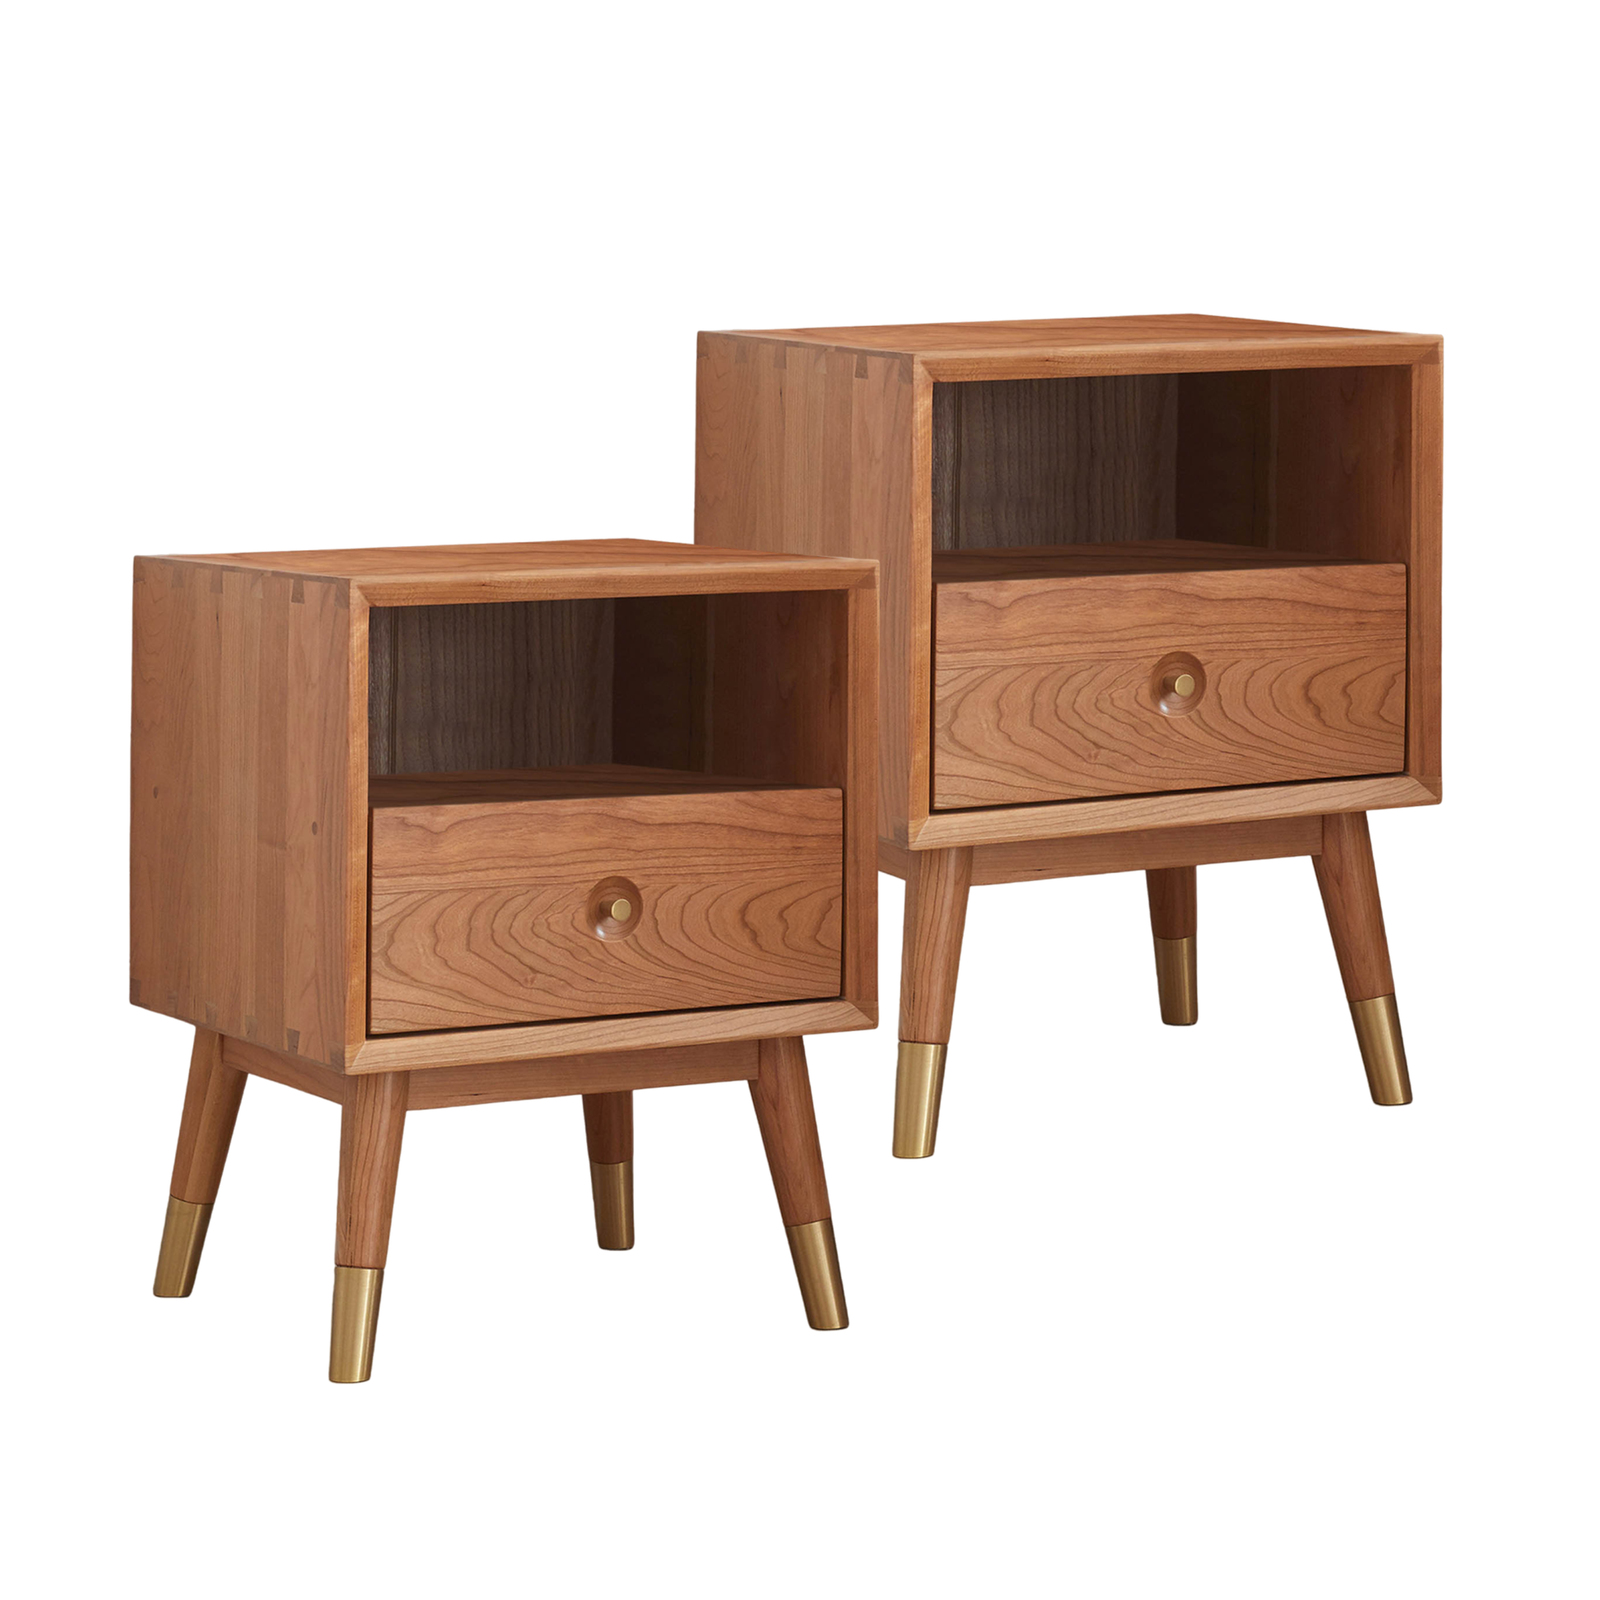 MIUZ 2x Solid Timber Bedside Tables Drawers Side Table Nightstand Storage Cabinet Wood